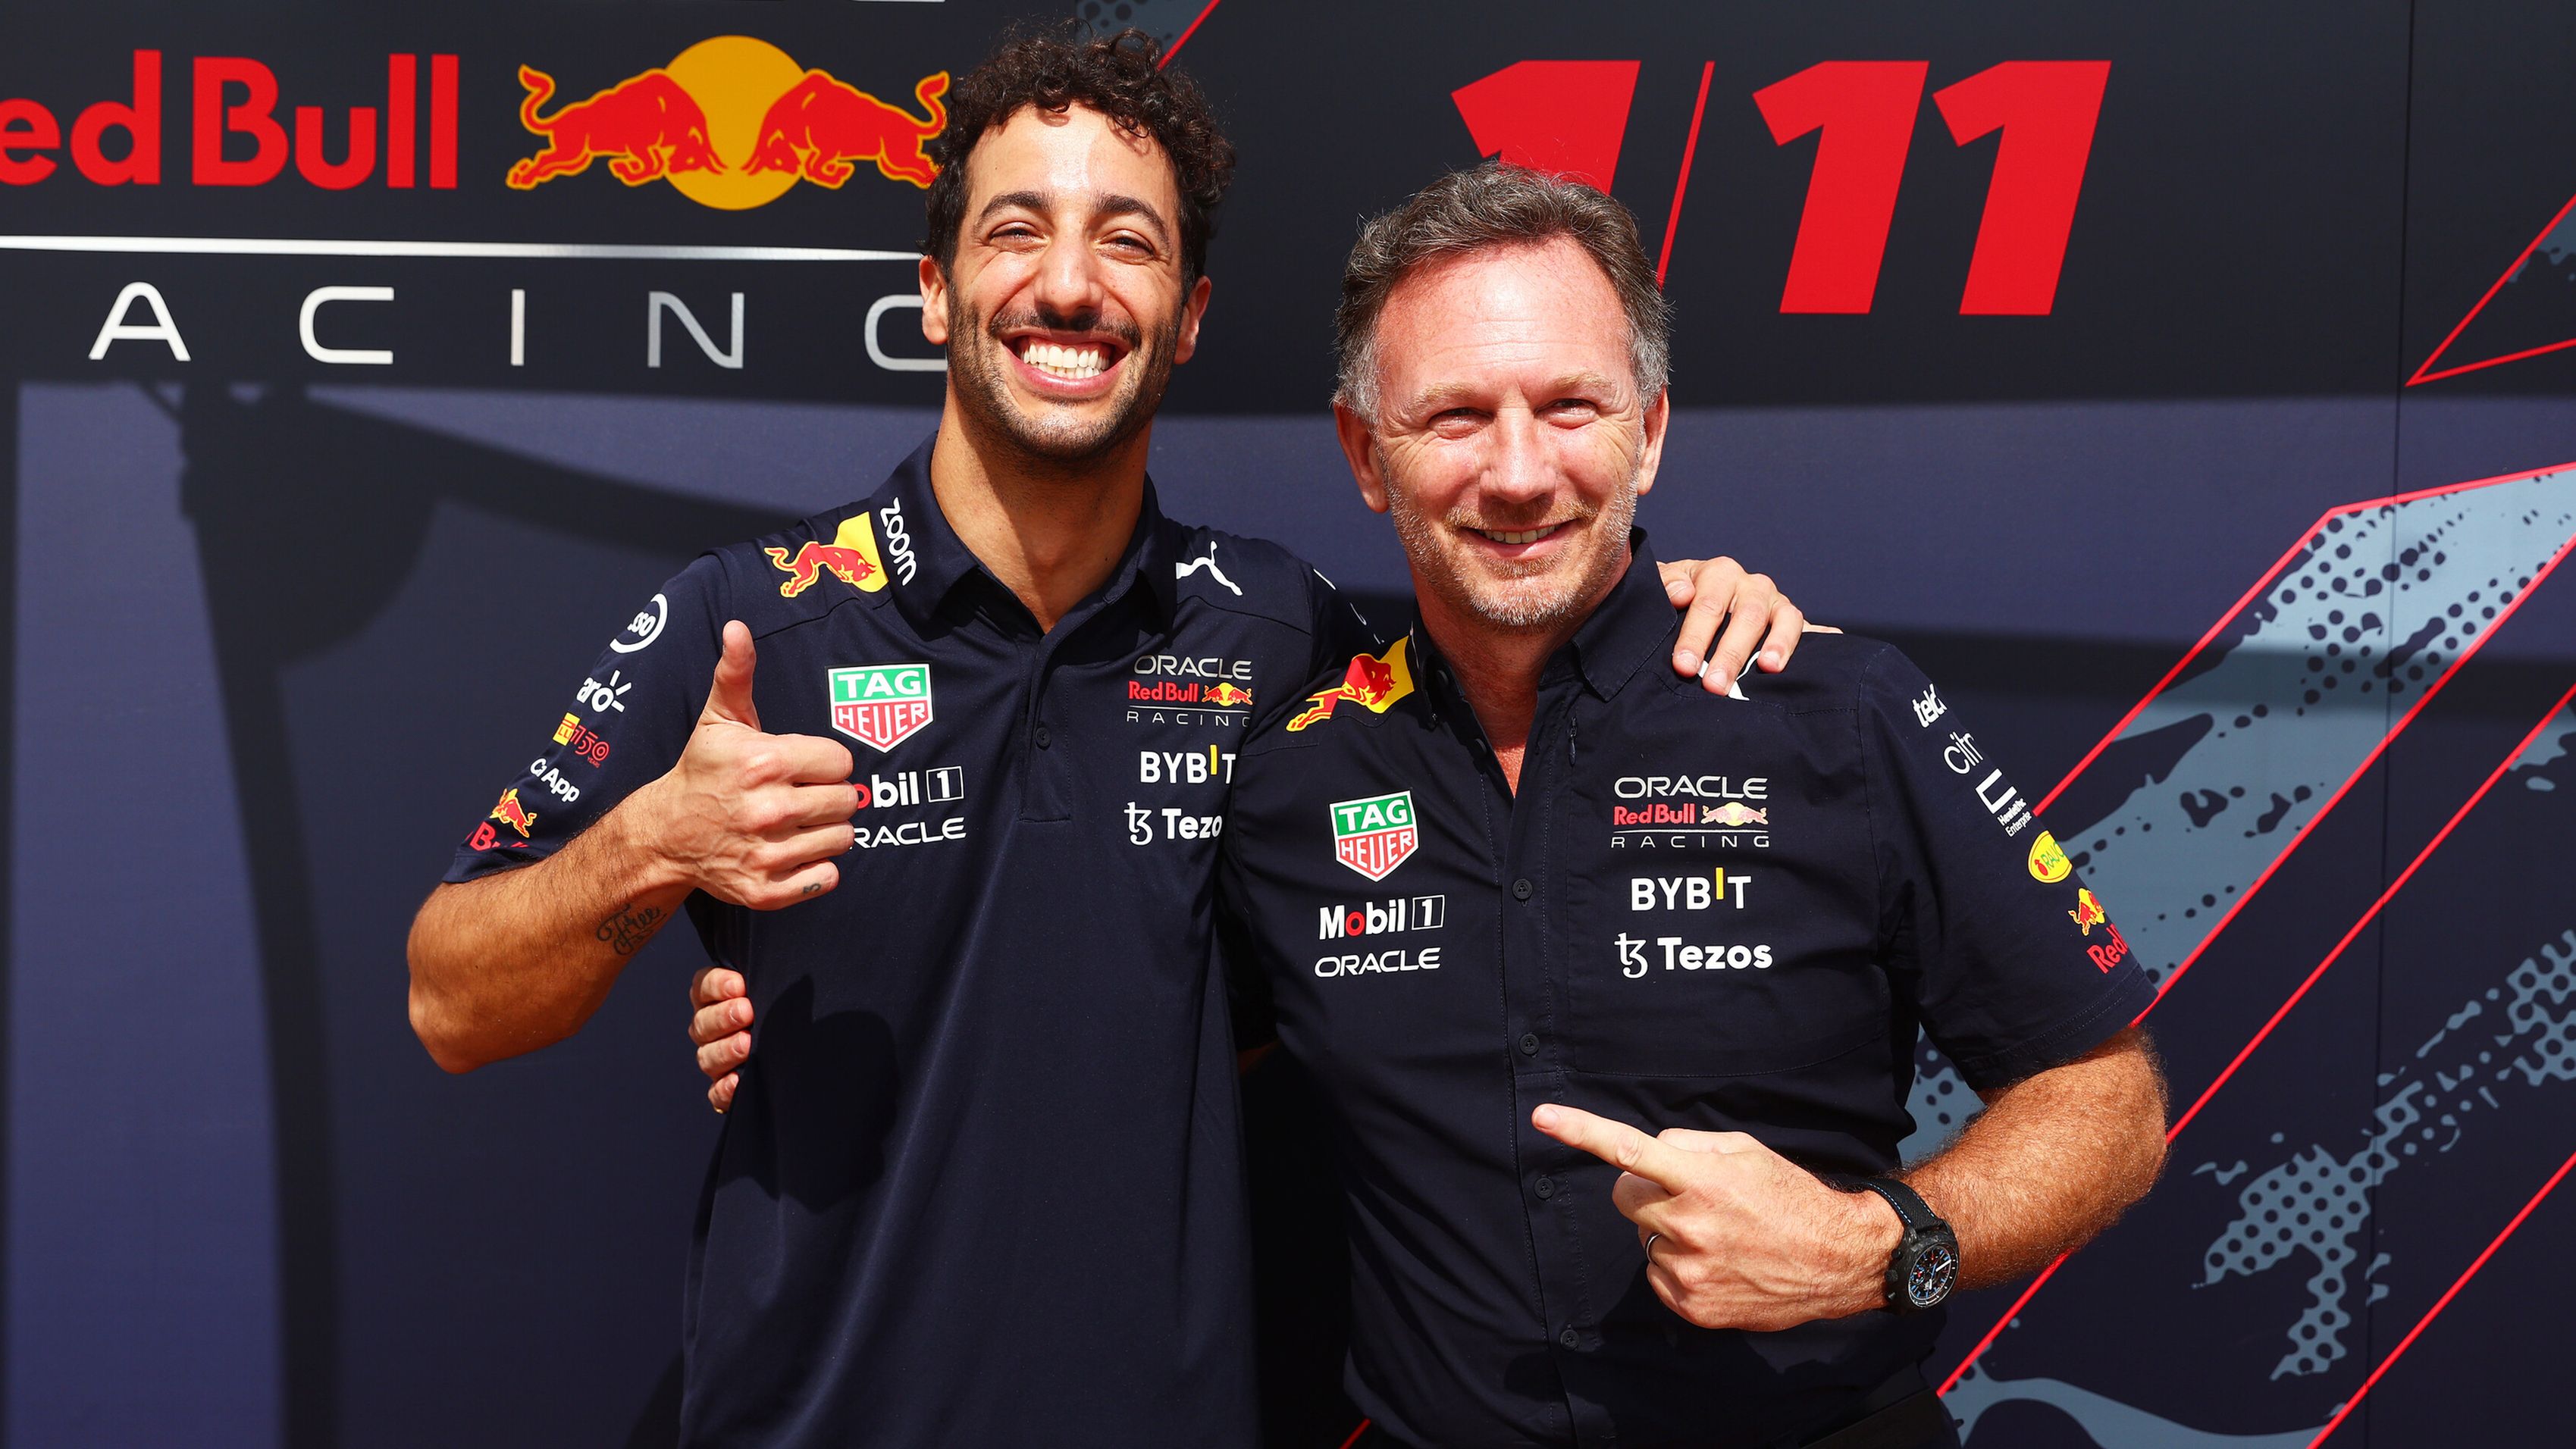 Daniel Ricciardo given extra duties as apart of reserve driver stand-in role with Red Bull